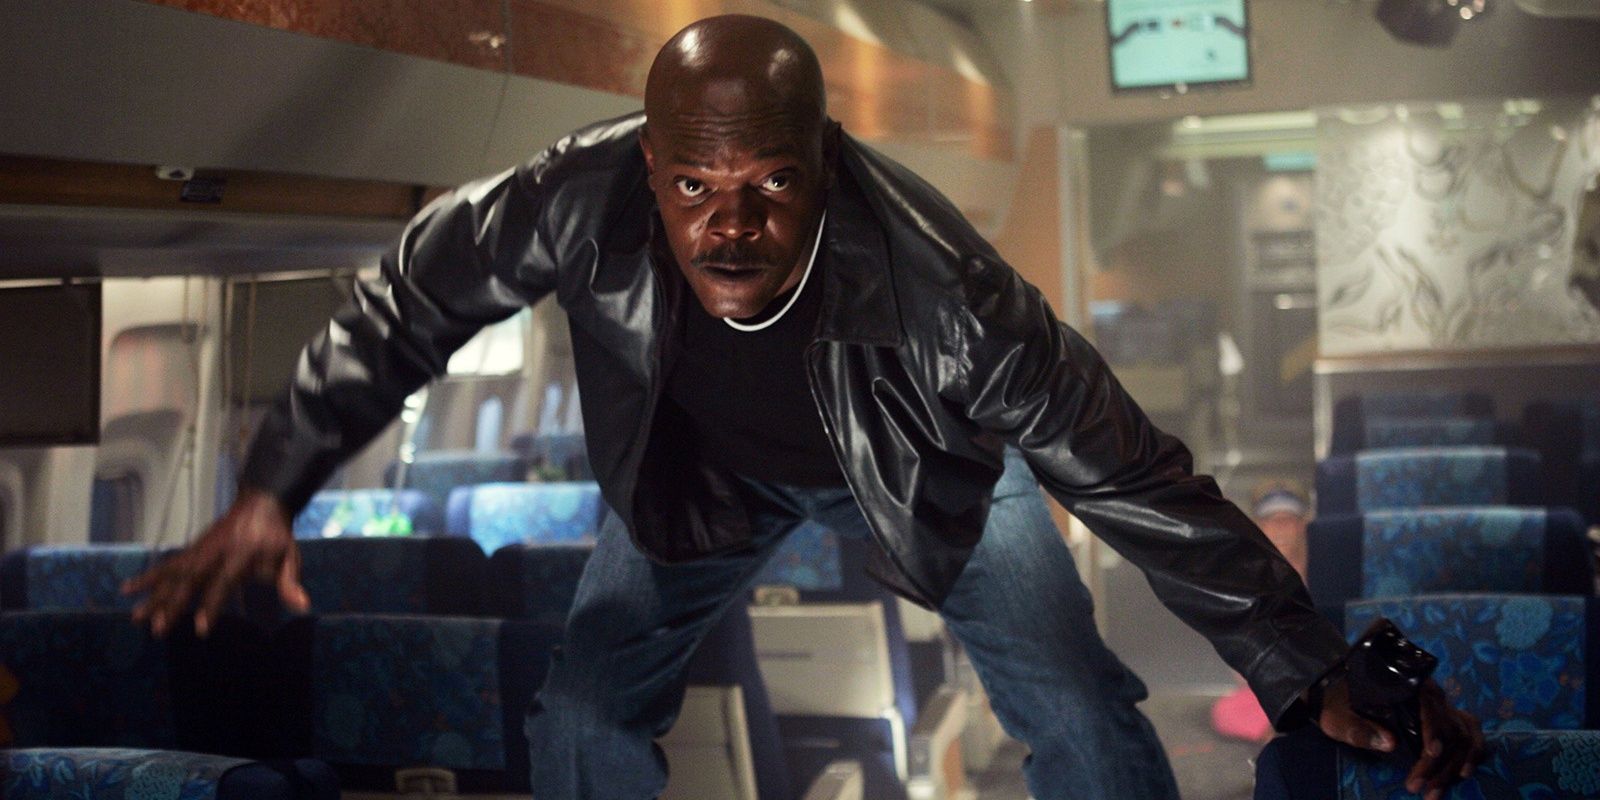 Snakes on a Plane Nearly Had A Different Title Until Samuel L. Jackson Fought The Studio: “Hell Is Wrong With You?”